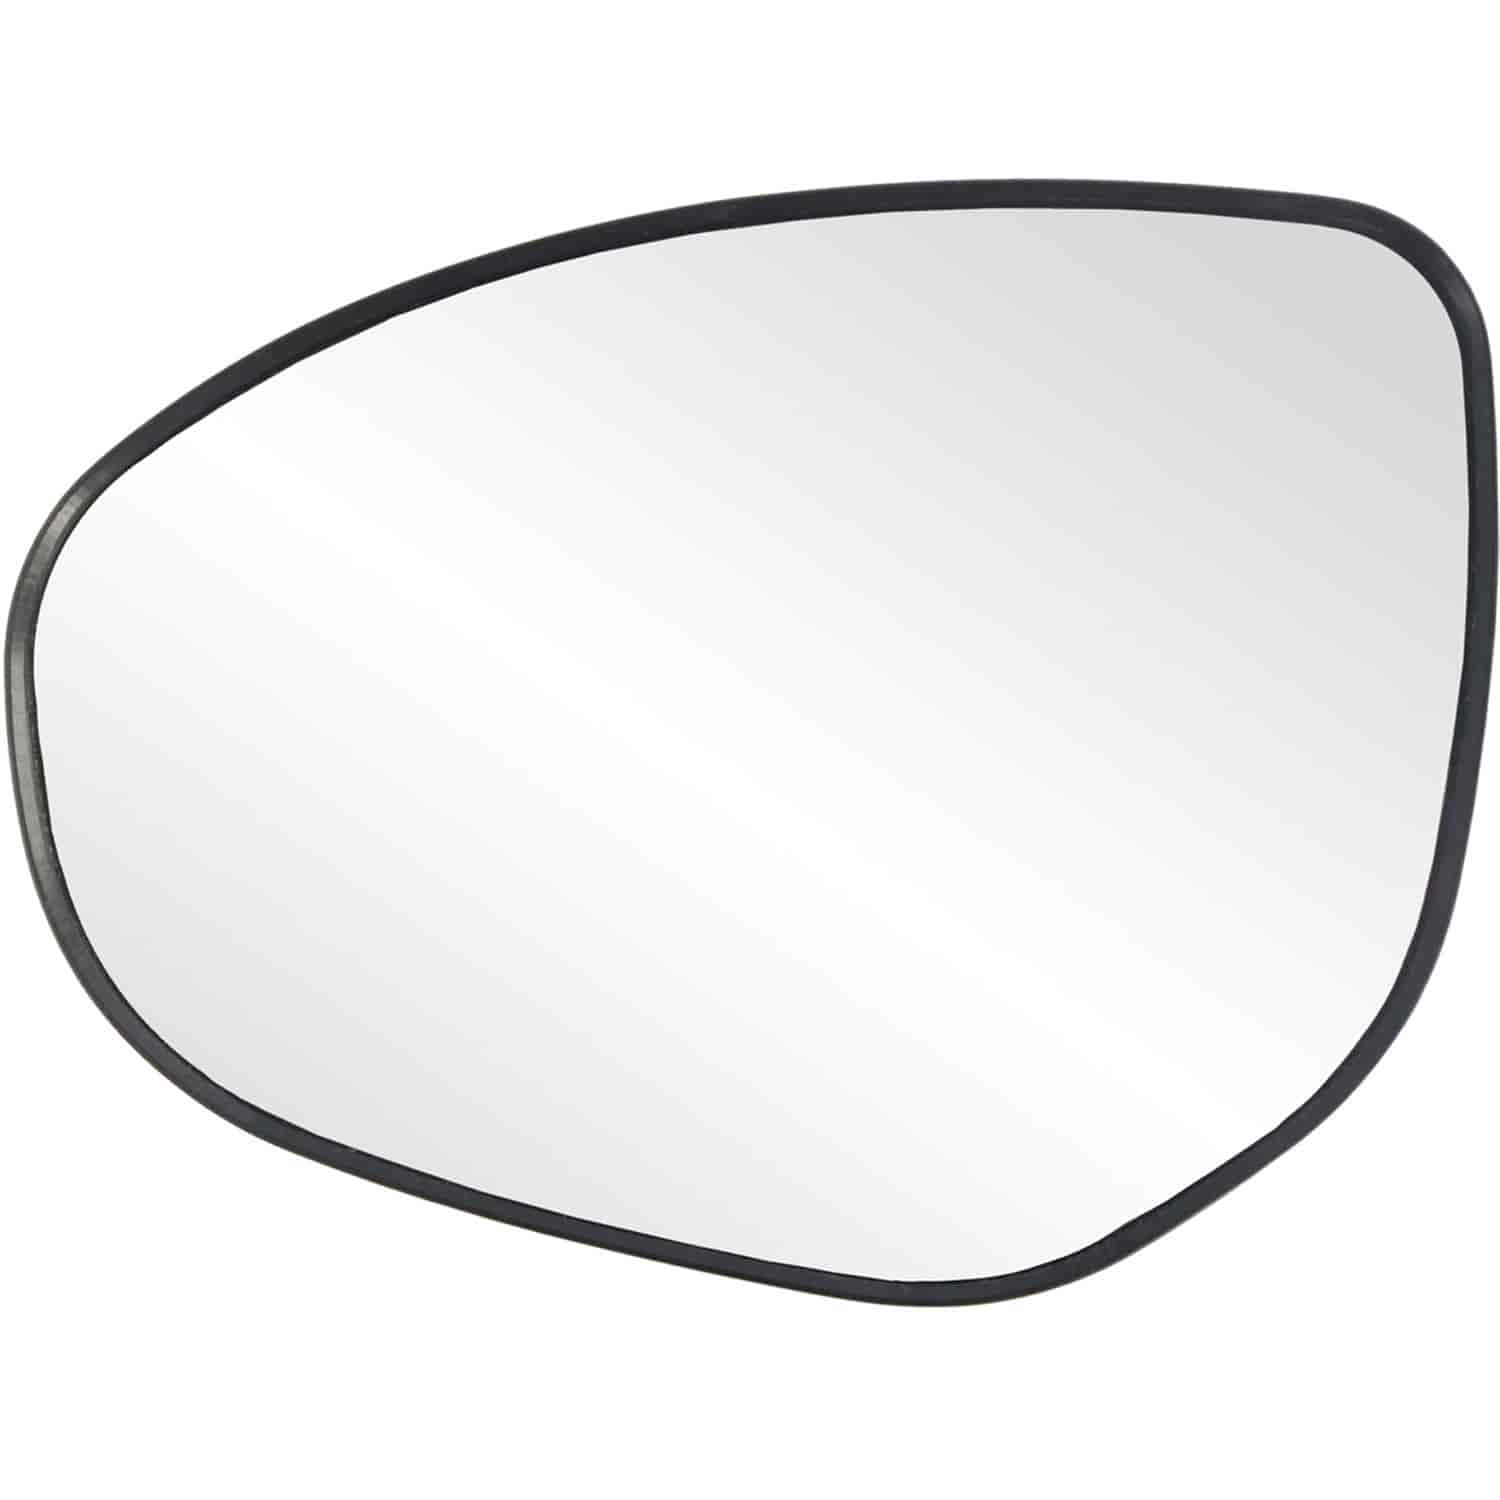 Replacement Glass Assembly for 11-14 Mazda 2 w/o Blind Spot lens; 10-13 Mazda 3 w/o Blind Spot lens